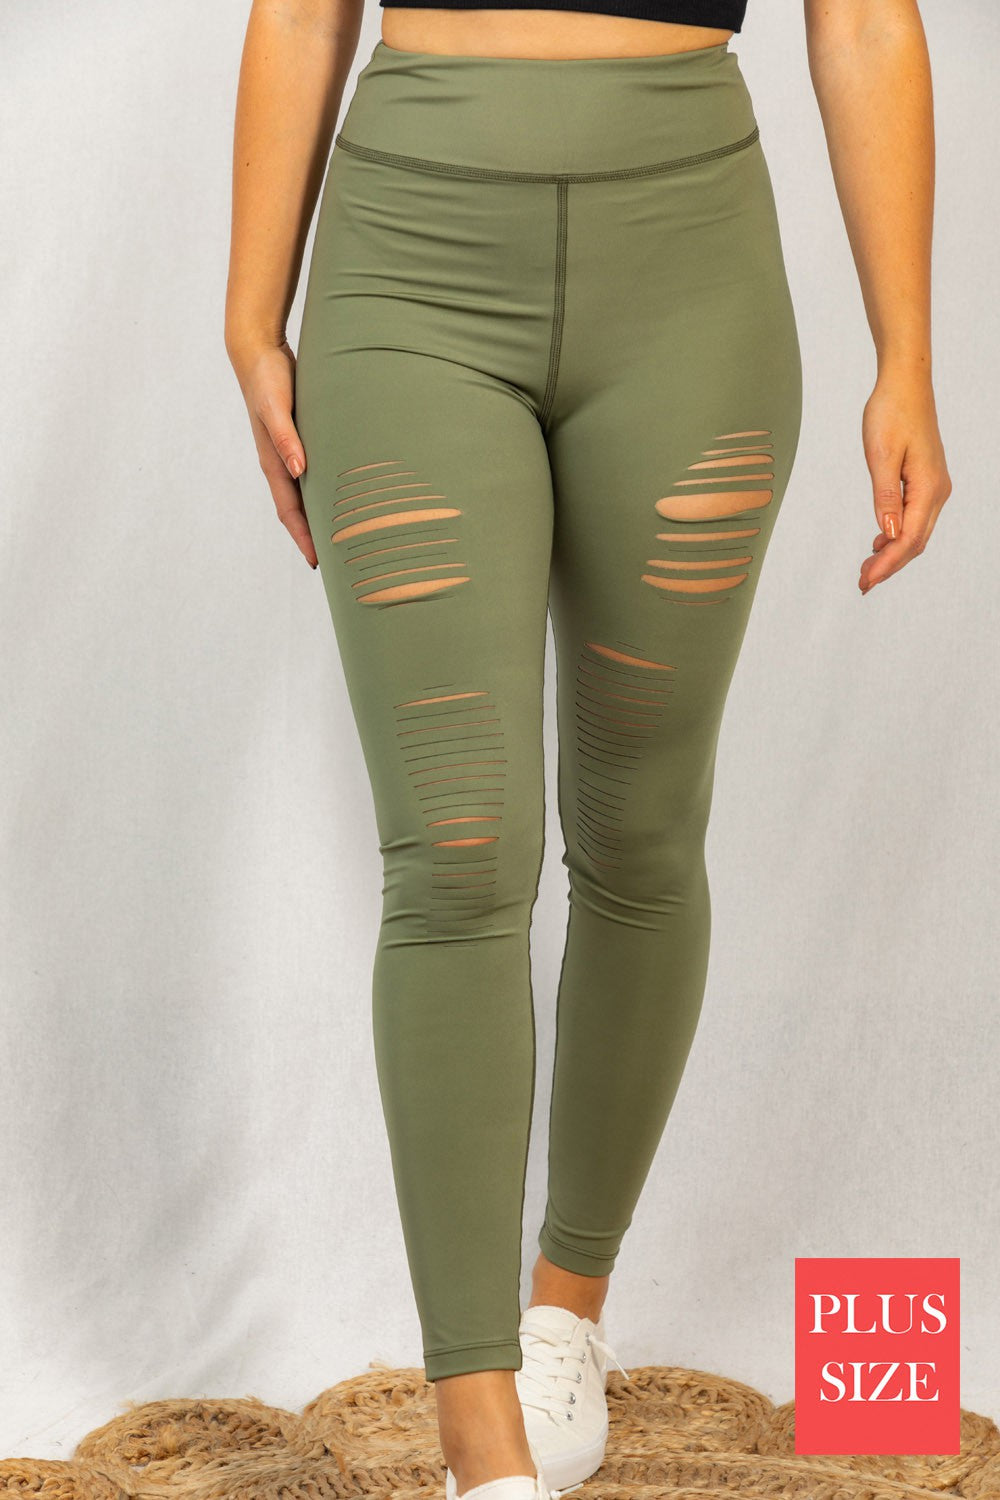 Spice Things Up Laser Cut Leggings in Olive BIN 34 – Wigs For Every Woman